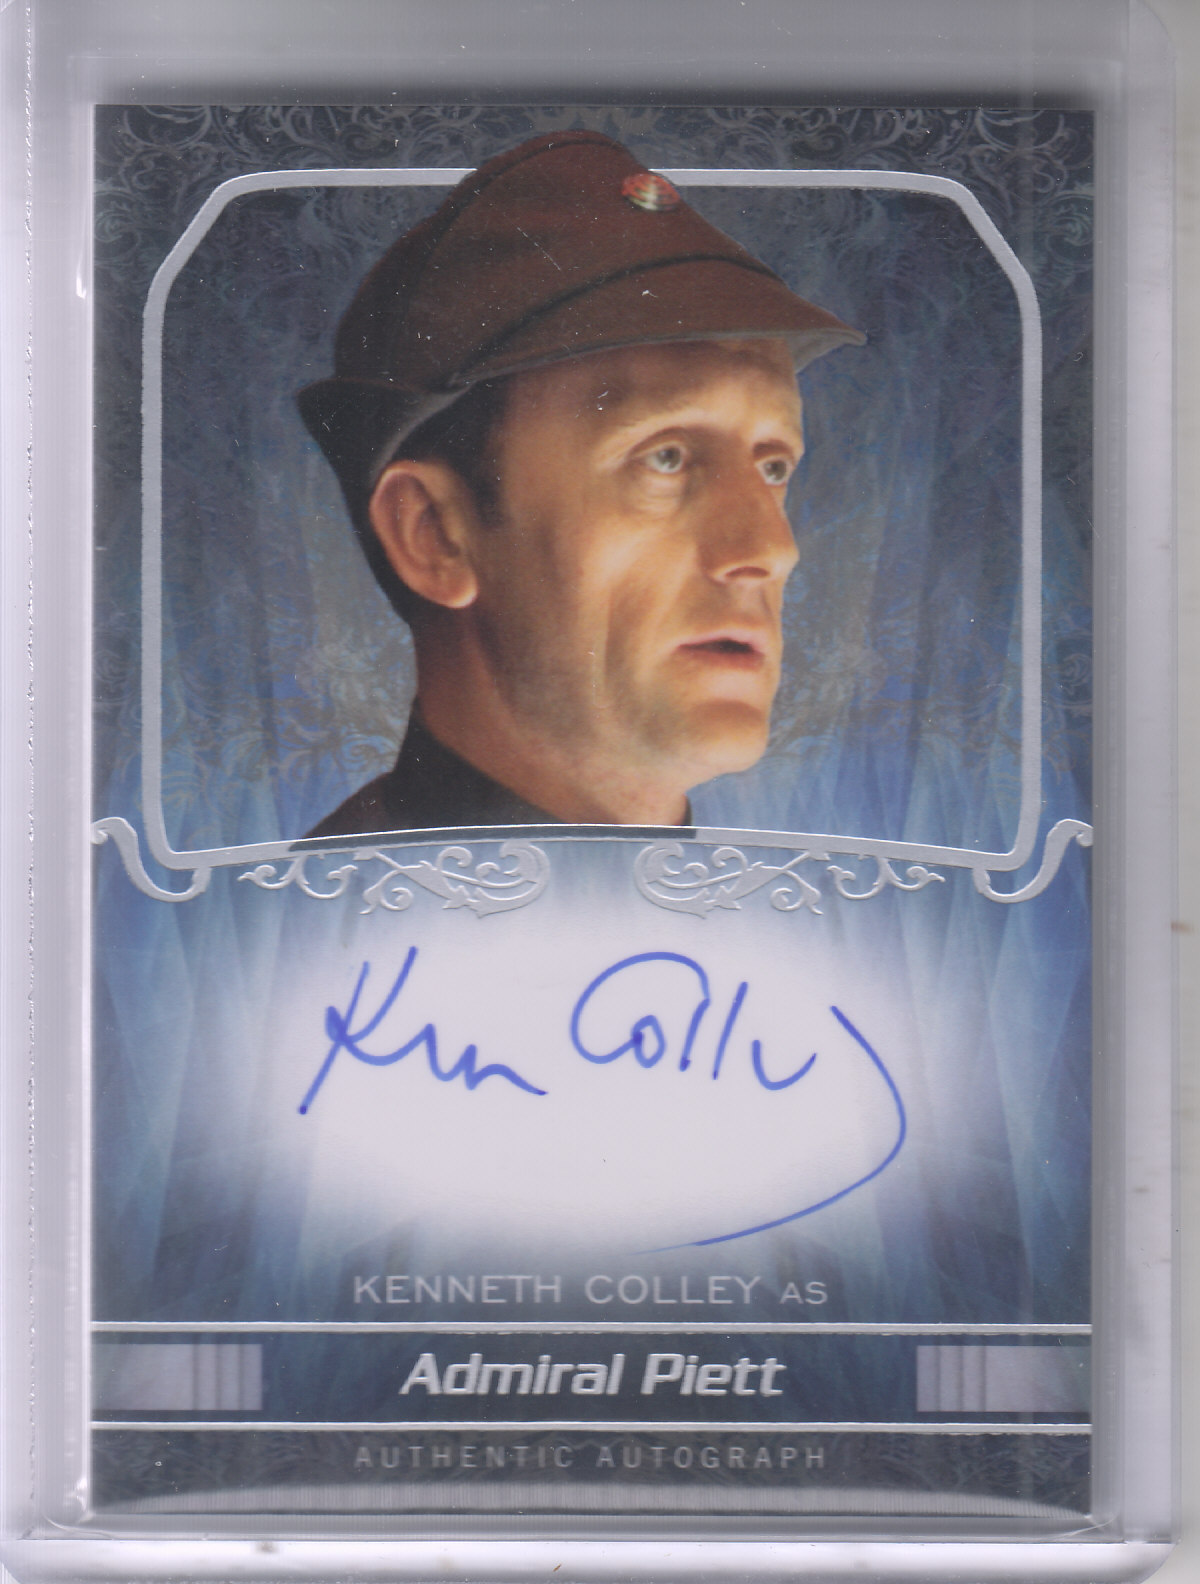 Buy Kenneth Colley Cards Online